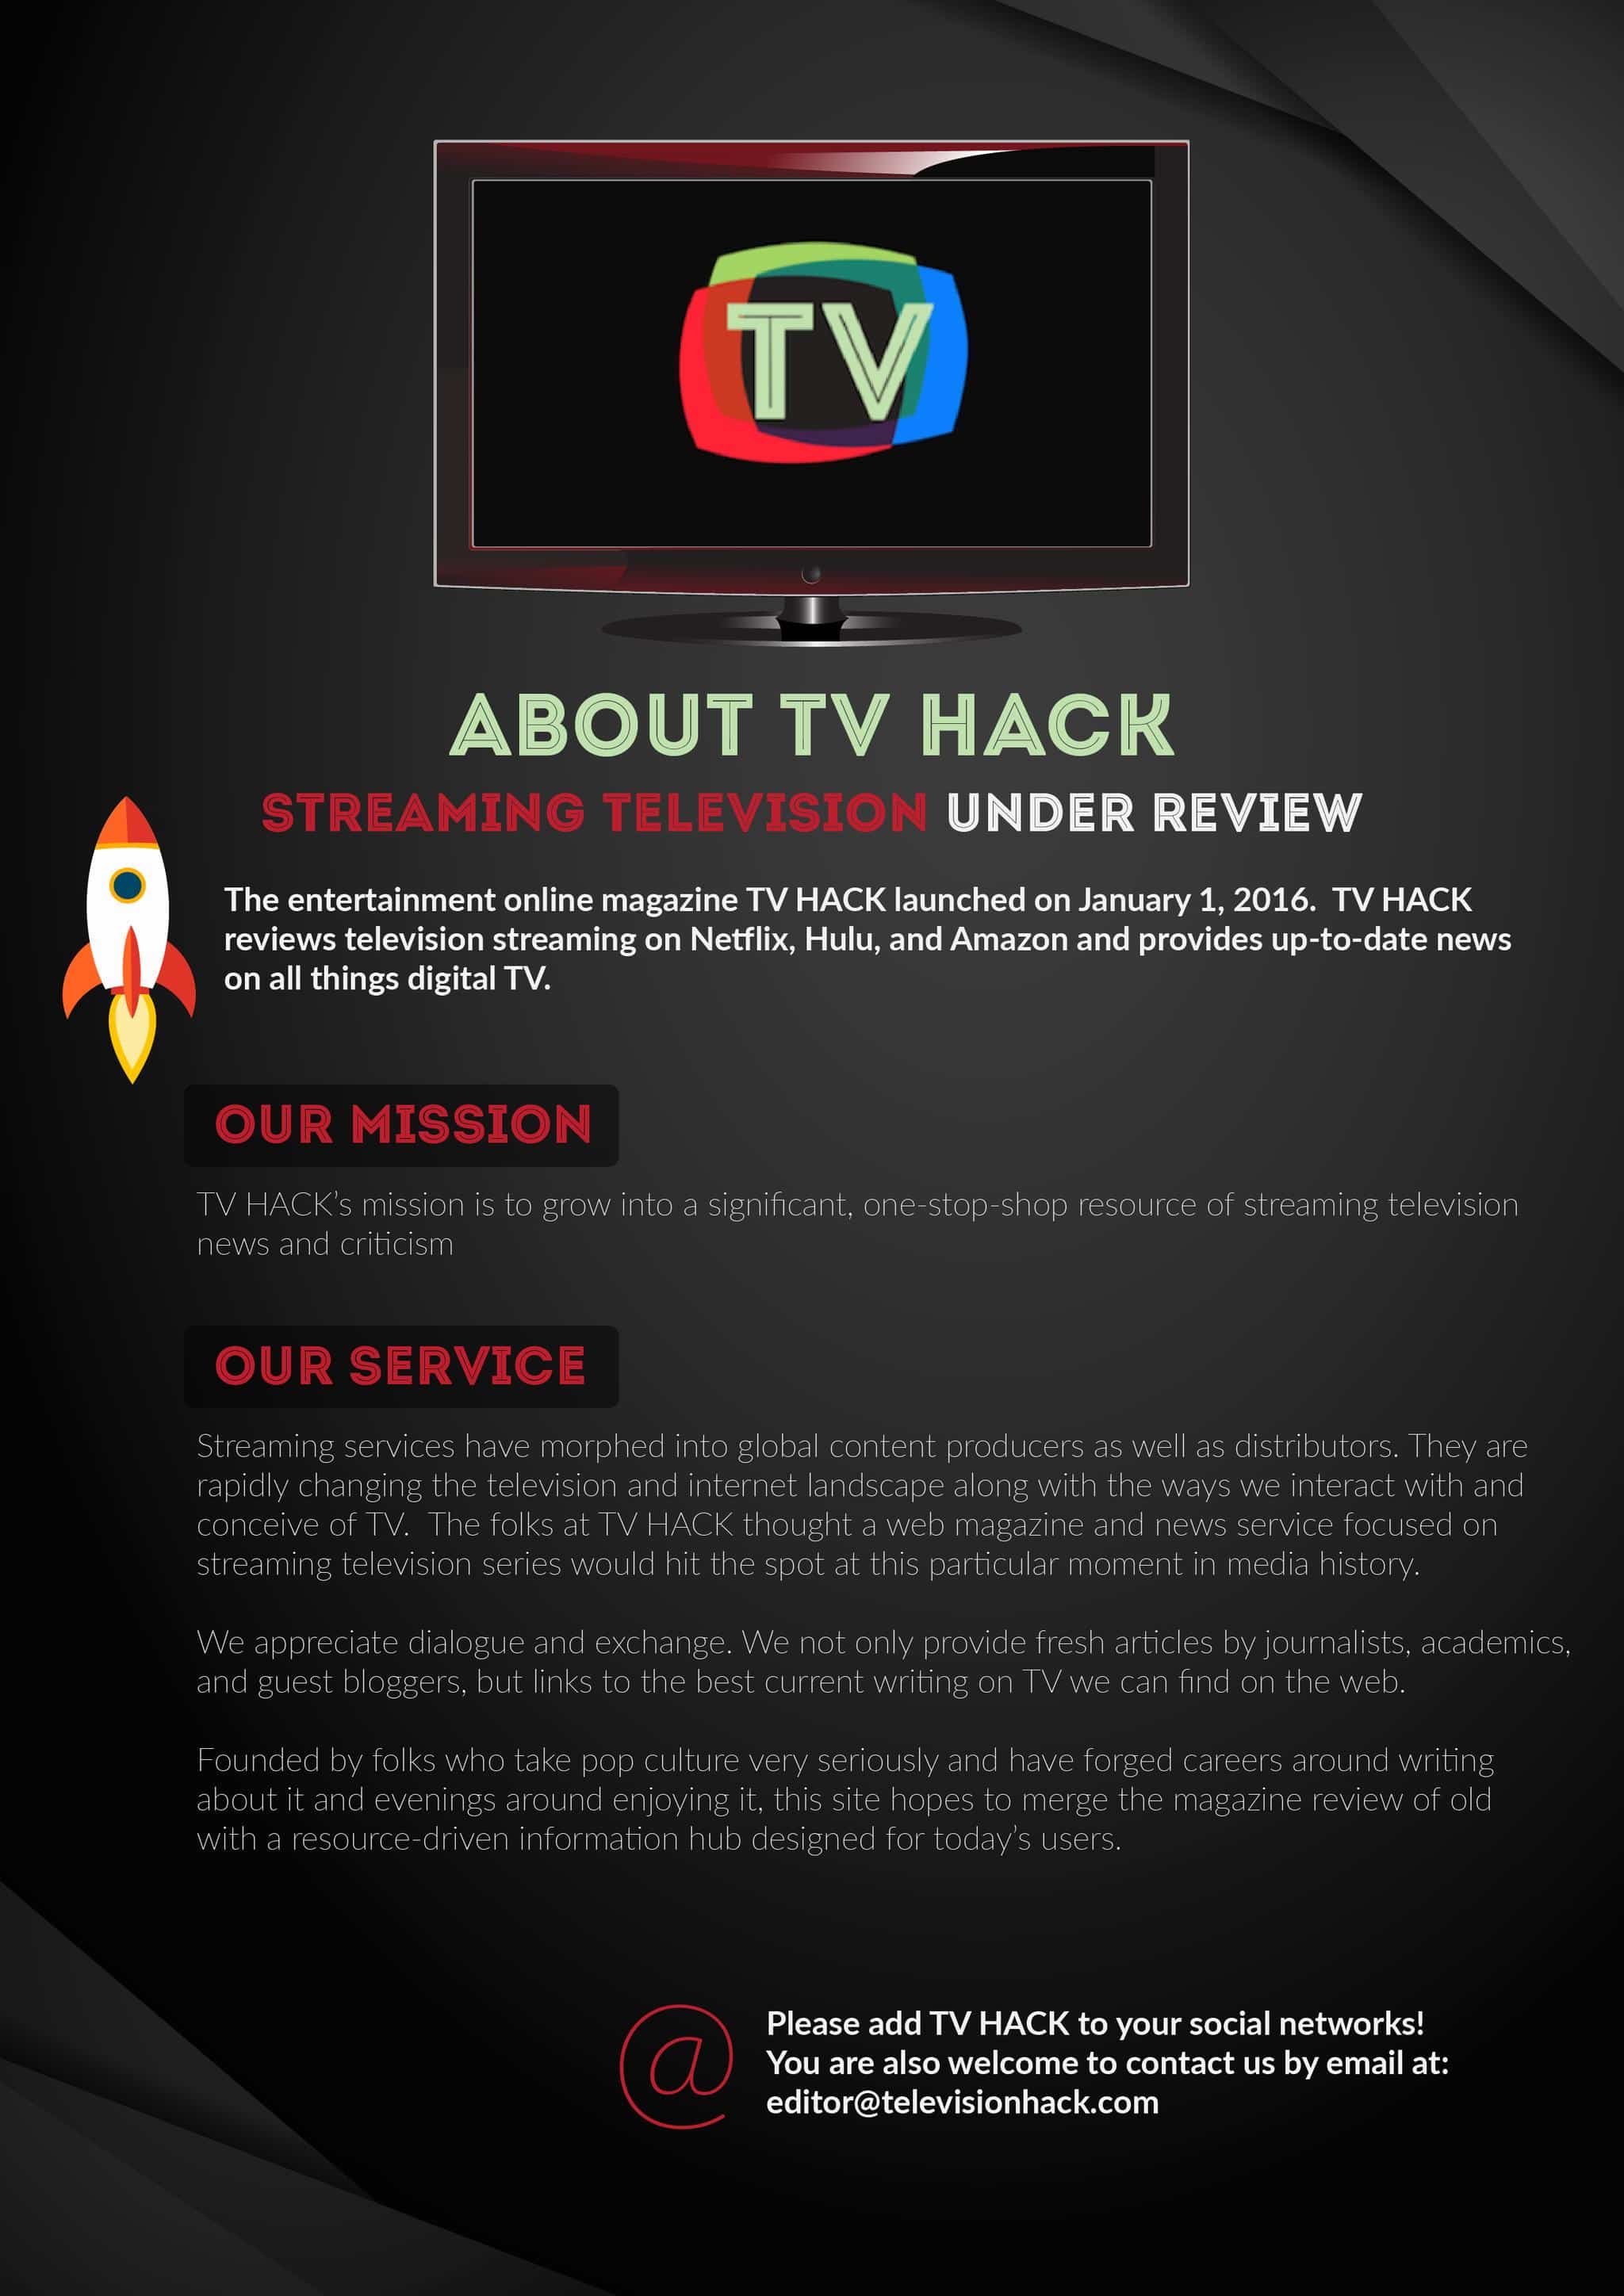 ABOUT TV HACK Streaming Television Netflix Reviews Hulu Reviews Amazon Instant Reviews